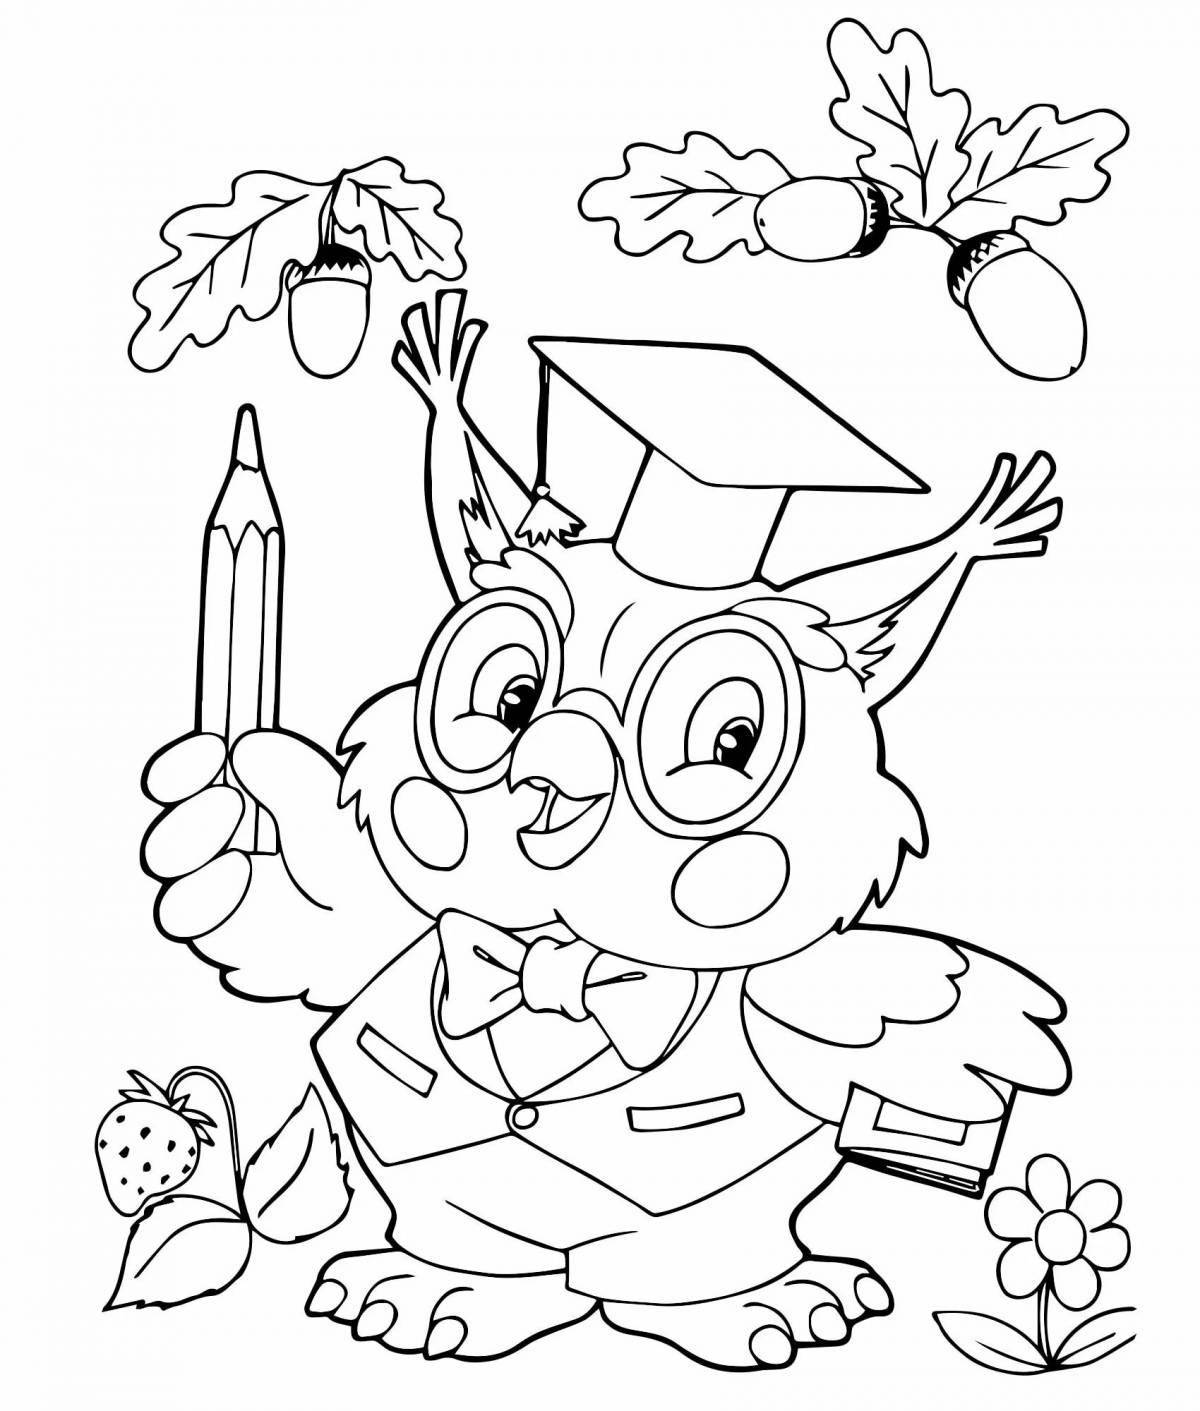 Colorful coloring book for first graders